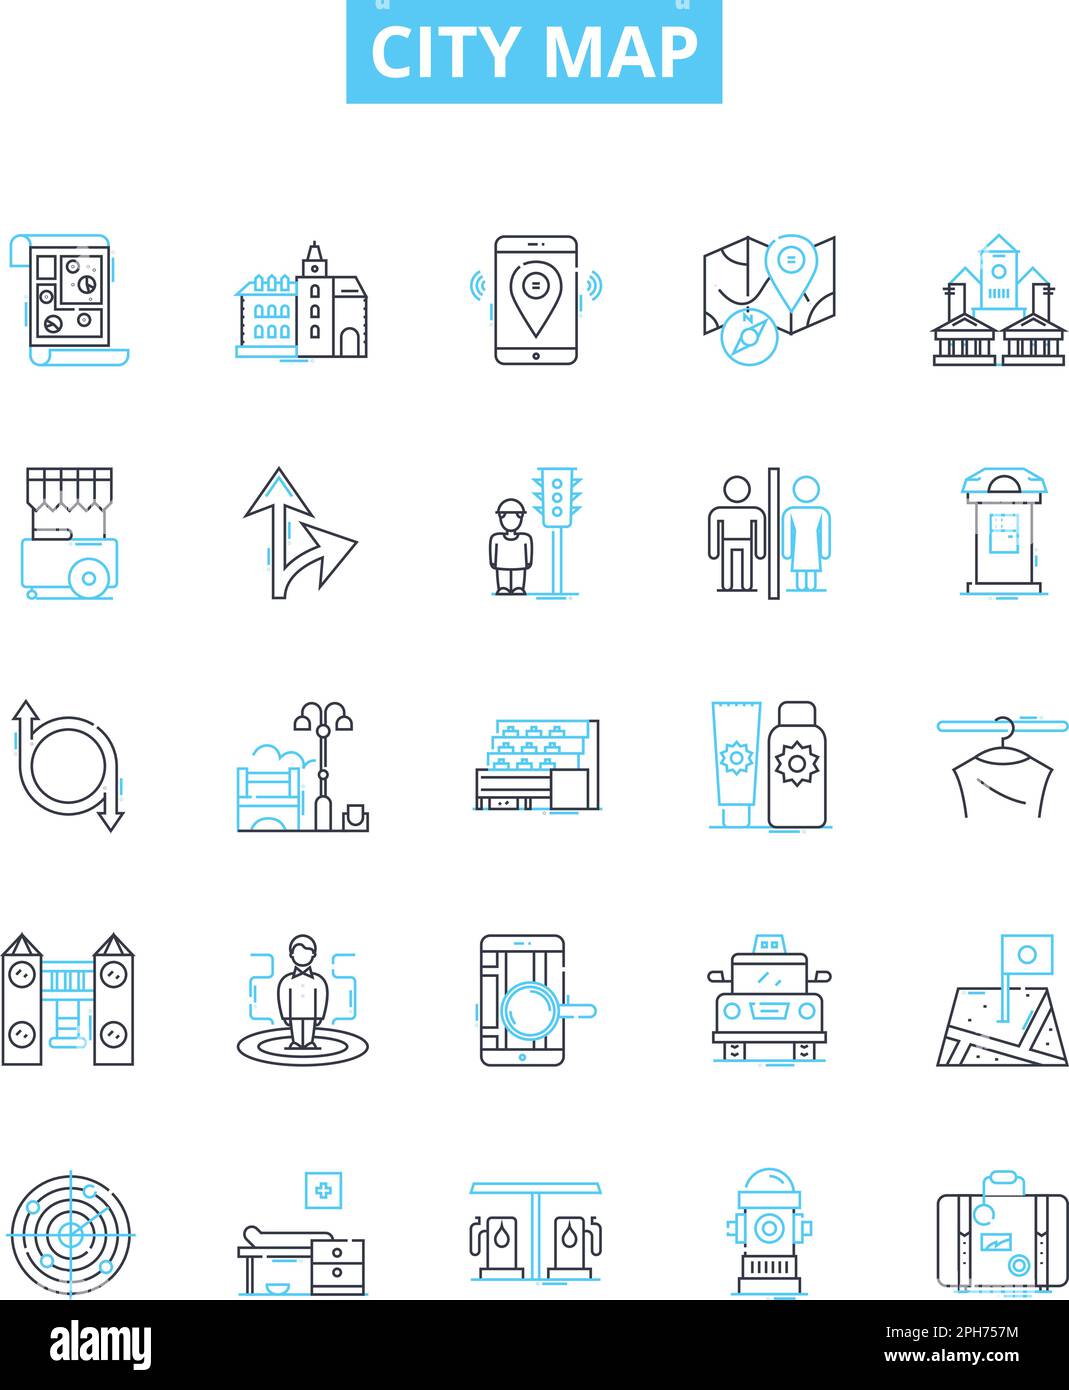 City map vector line icons set. City, Map, Urban, Layout, Cartography, Streets, Directions illustration outline concept symbols and signs Stock Vector